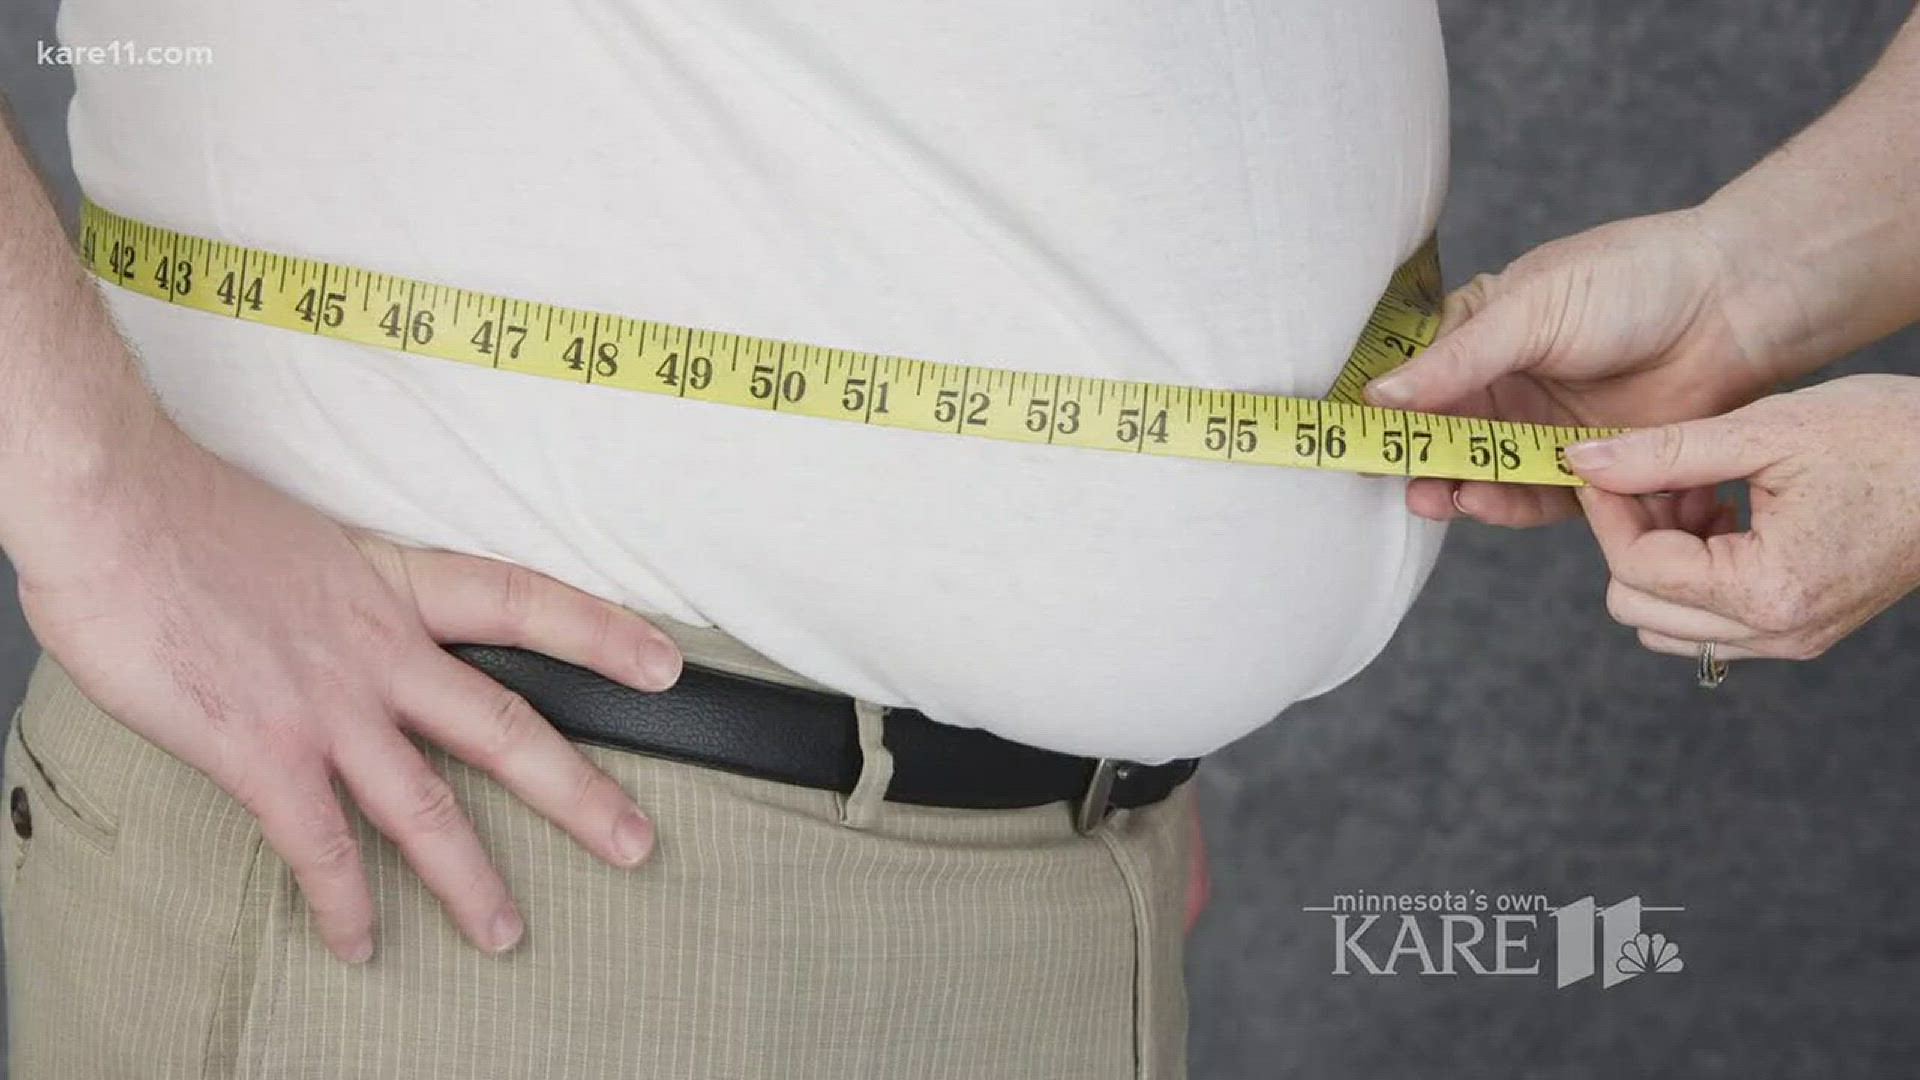 We all know that diet and exercise is key, but when should someone consider weight loss surgery? http://kare11.tv/2lRQYWH